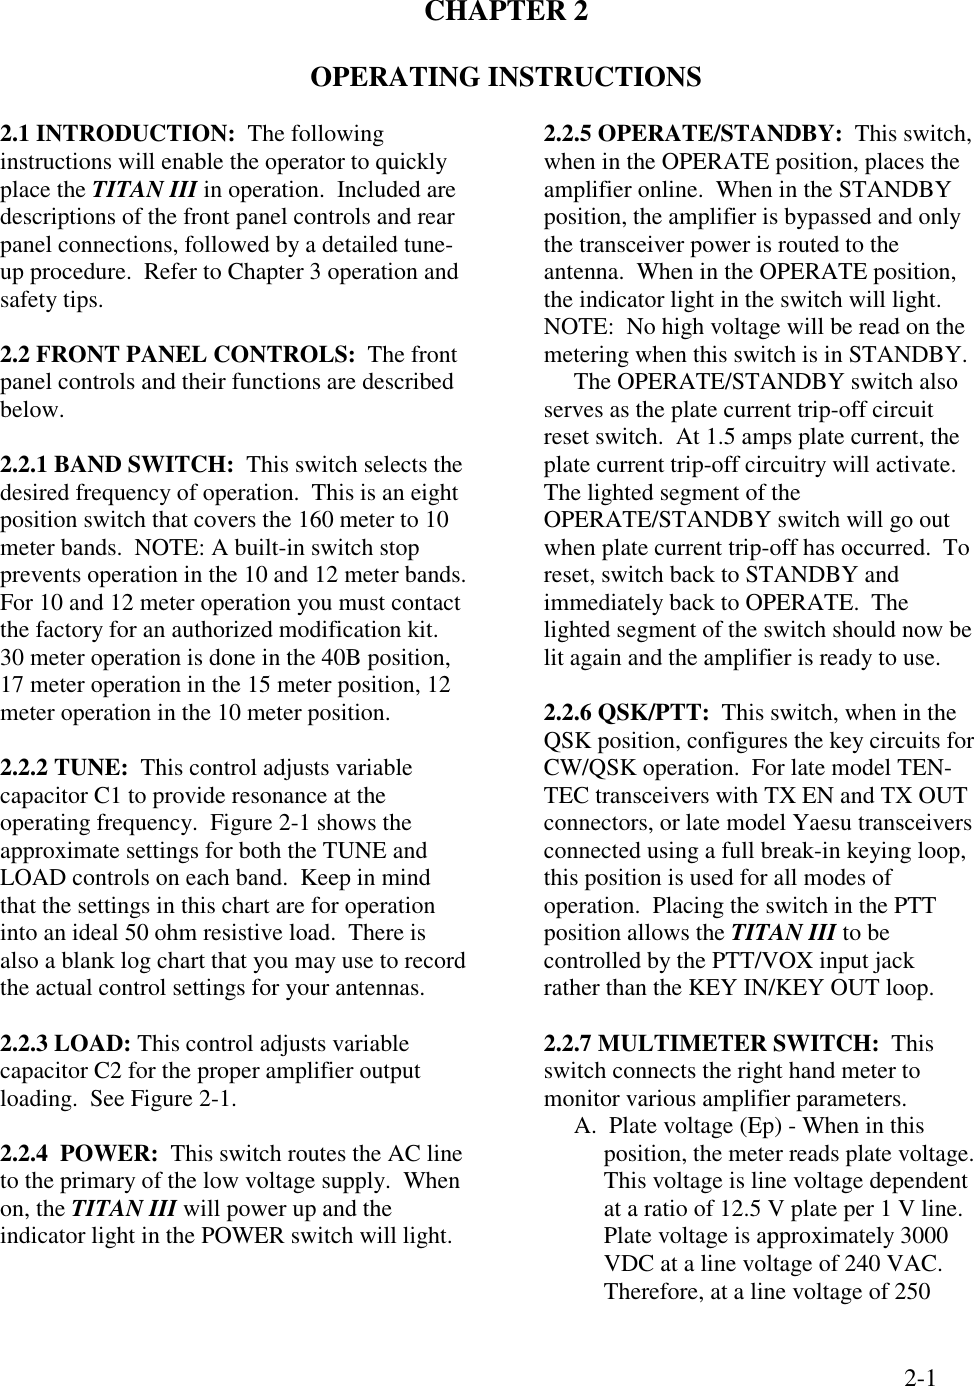 2-1CHAPTER 2OPERATING INSTRUCTIONS2.1 INTRODUCTION:  The followinginstructions will enable the operator to quicklyplace the TITAN III in operation.  Included aredescriptions of the front panel controls and rearpanel connections, followed by a detailed tune-up procedure.  Refer to Chapter 3 operation andsafety tips.2.2 FRONT PANEL CONTROLS:  The frontpanel controls and their functions are describedbelow.2.2.1 BAND SWITCH:  This switch selects thedesired frequency of operation.  This is an eightposition switch that covers the 160 meter to 10meter bands.  NOTE: A built-in switch stopprevents operation in the 10 and 12 meter bands.For 10 and 12 meter operation you must contactthe factory for an authorized modification kit.30 meter operation is done in the 40B position,17 meter operation in the 15 meter position, 12meter operation in the 10 meter position.2.2.2 TUNE:  This control adjusts variablecapacitor C1 to provide resonance at theoperating frequency.  Figure 2-1 shows theapproximate settings for both the TUNE andLOAD controls on each band.  Keep in mindthat the settings in this chart are for operationinto an ideal 50 ohm resistive load.  There isalso a blank log chart that you may use to recordthe actual control settings for your antennas.2.2.3 LOAD: This control adjusts variablecapacitor C2 for the proper amplifier outputloading.  See Figure 2-1.2.2.4  POWER:  This switch routes the AC lineto the primary of the low voltage supply.  Whenon, the TITAN III will power up and theindicator light in the POWER switch will light.2.2.5 OPERATE/STANDBY:  This switch,when in the OPERATE position, places theamplifier online.  When in the STANDBYposition, the amplifier is bypassed and onlythe transceiver power is routed to theantenna.  When in the OPERATE position,the indicator light in the switch will light.NOTE:  No high voltage will be read on themetering when this switch is in STANDBY.     The OPERATE/STANDBY switch alsoserves as the plate current trip-off circuitreset switch.  At 1.5 amps plate current, theplate current trip-off circuitry will activate.The lighted segment of theOPERATE/STANDBY switch will go outwhen plate current trip-off has occurred.  Toreset, switch back to STANDBY andimmediately back to OPERATE.  Thelighted segment of the switch should now belit again and the amplifier is ready to use.2.2.6 QSK/PTT:  This switch, when in theQSK position, configures the key circuits forCW/QSK operation.  For late model TEN-TEC transceivers with TX EN and TX OUTconnectors, or late model Yaesu transceiversconnected using a full break-in keying loop,this position is used for all modes ofoperation.  Placing the switch in the PTTposition allows the TITAN III to becontrolled by the PTT/VOX input jackrather than the KEY IN/KEY OUT loop.2.2.7 MULTIMETER SWITCH:  Thisswitch connects the right hand meter tomonitor various amplifier parameters.A.  Plate voltage (Ep) - When in thisposition, the meter reads plate voltage.This voltage is line voltage dependentat a ratio of 12.5 V plate per 1 V line.Plate voltage is approximately 3000VDC at a line voltage of 240 VAC.Therefore, at a line voltage of 250